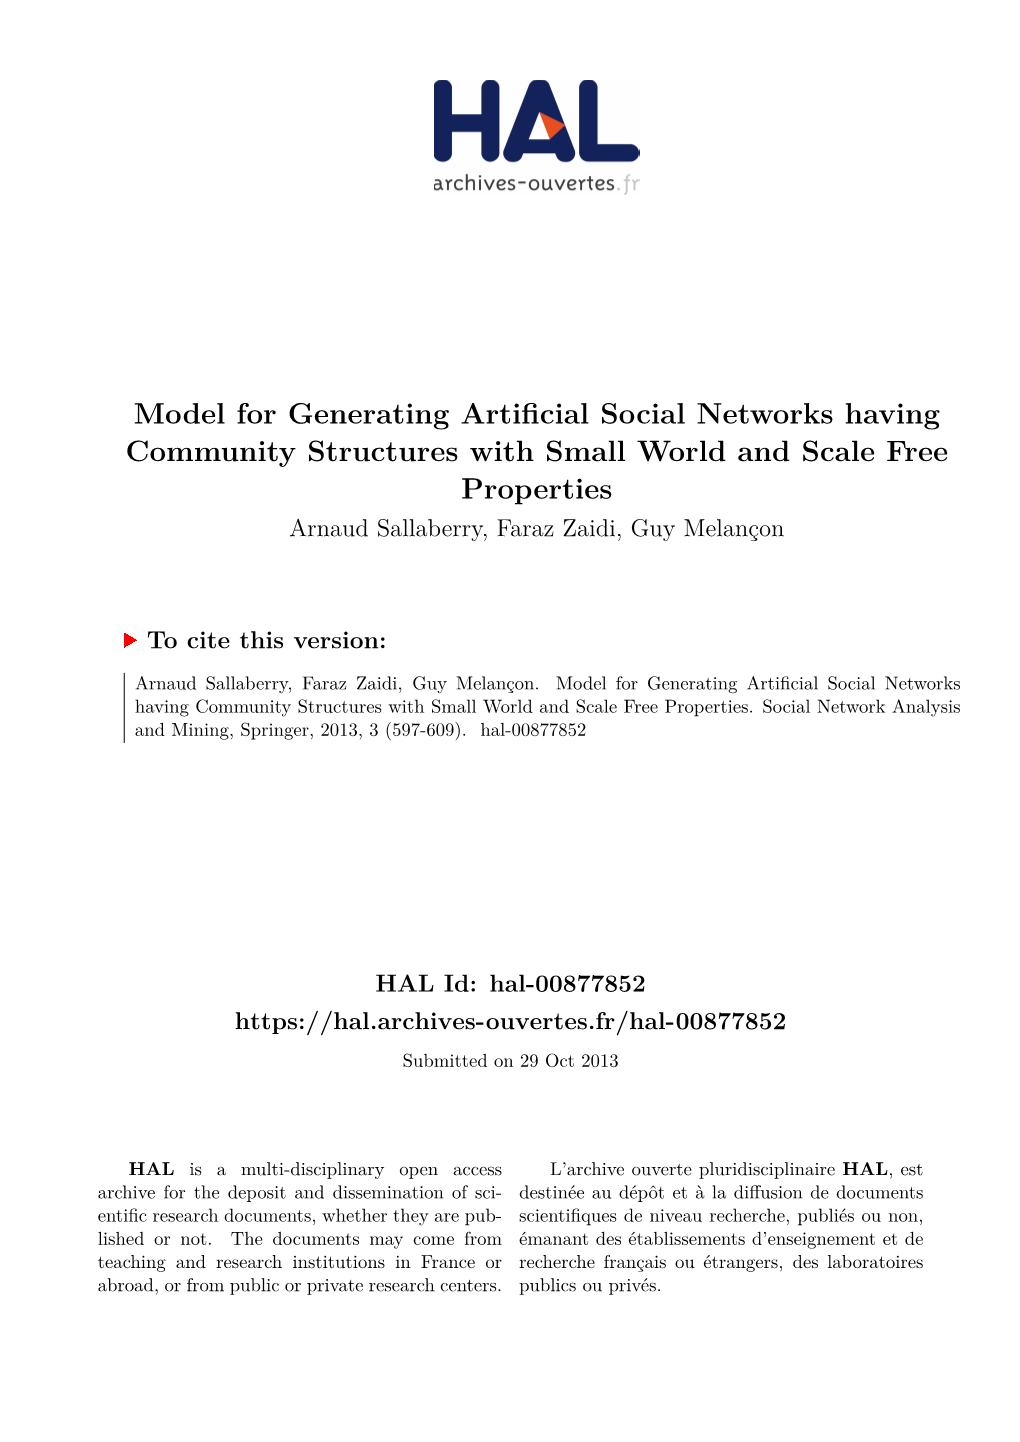 Model for Generating Artificial Social Networks Having Community Structures with Small World and Scale Free Properties Arnaud Sallaberry, Faraz Zaidi, Guy Melançon